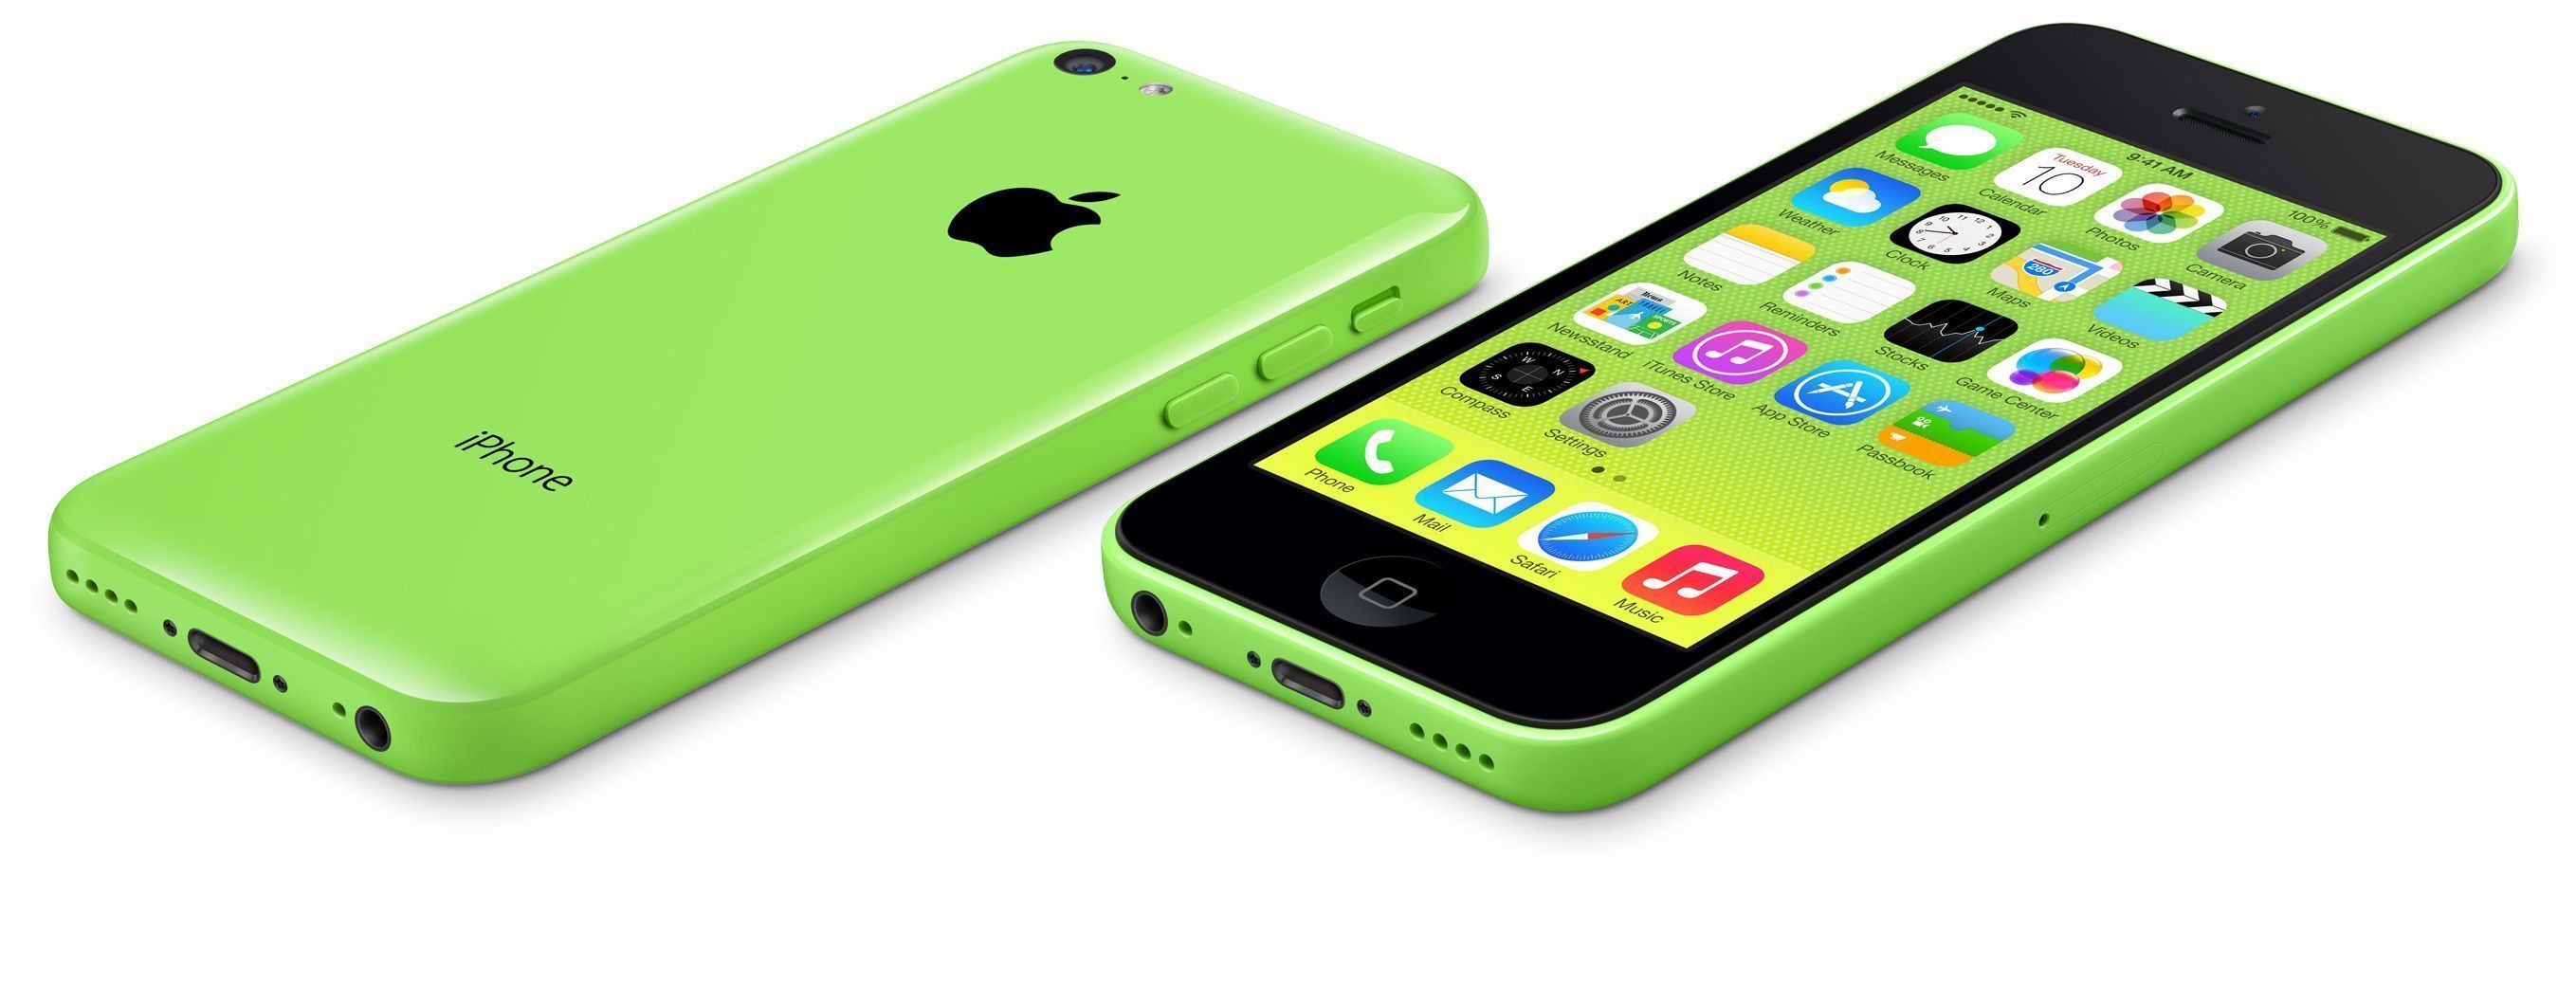 green-iPhone-5c-front-and-back.jpg